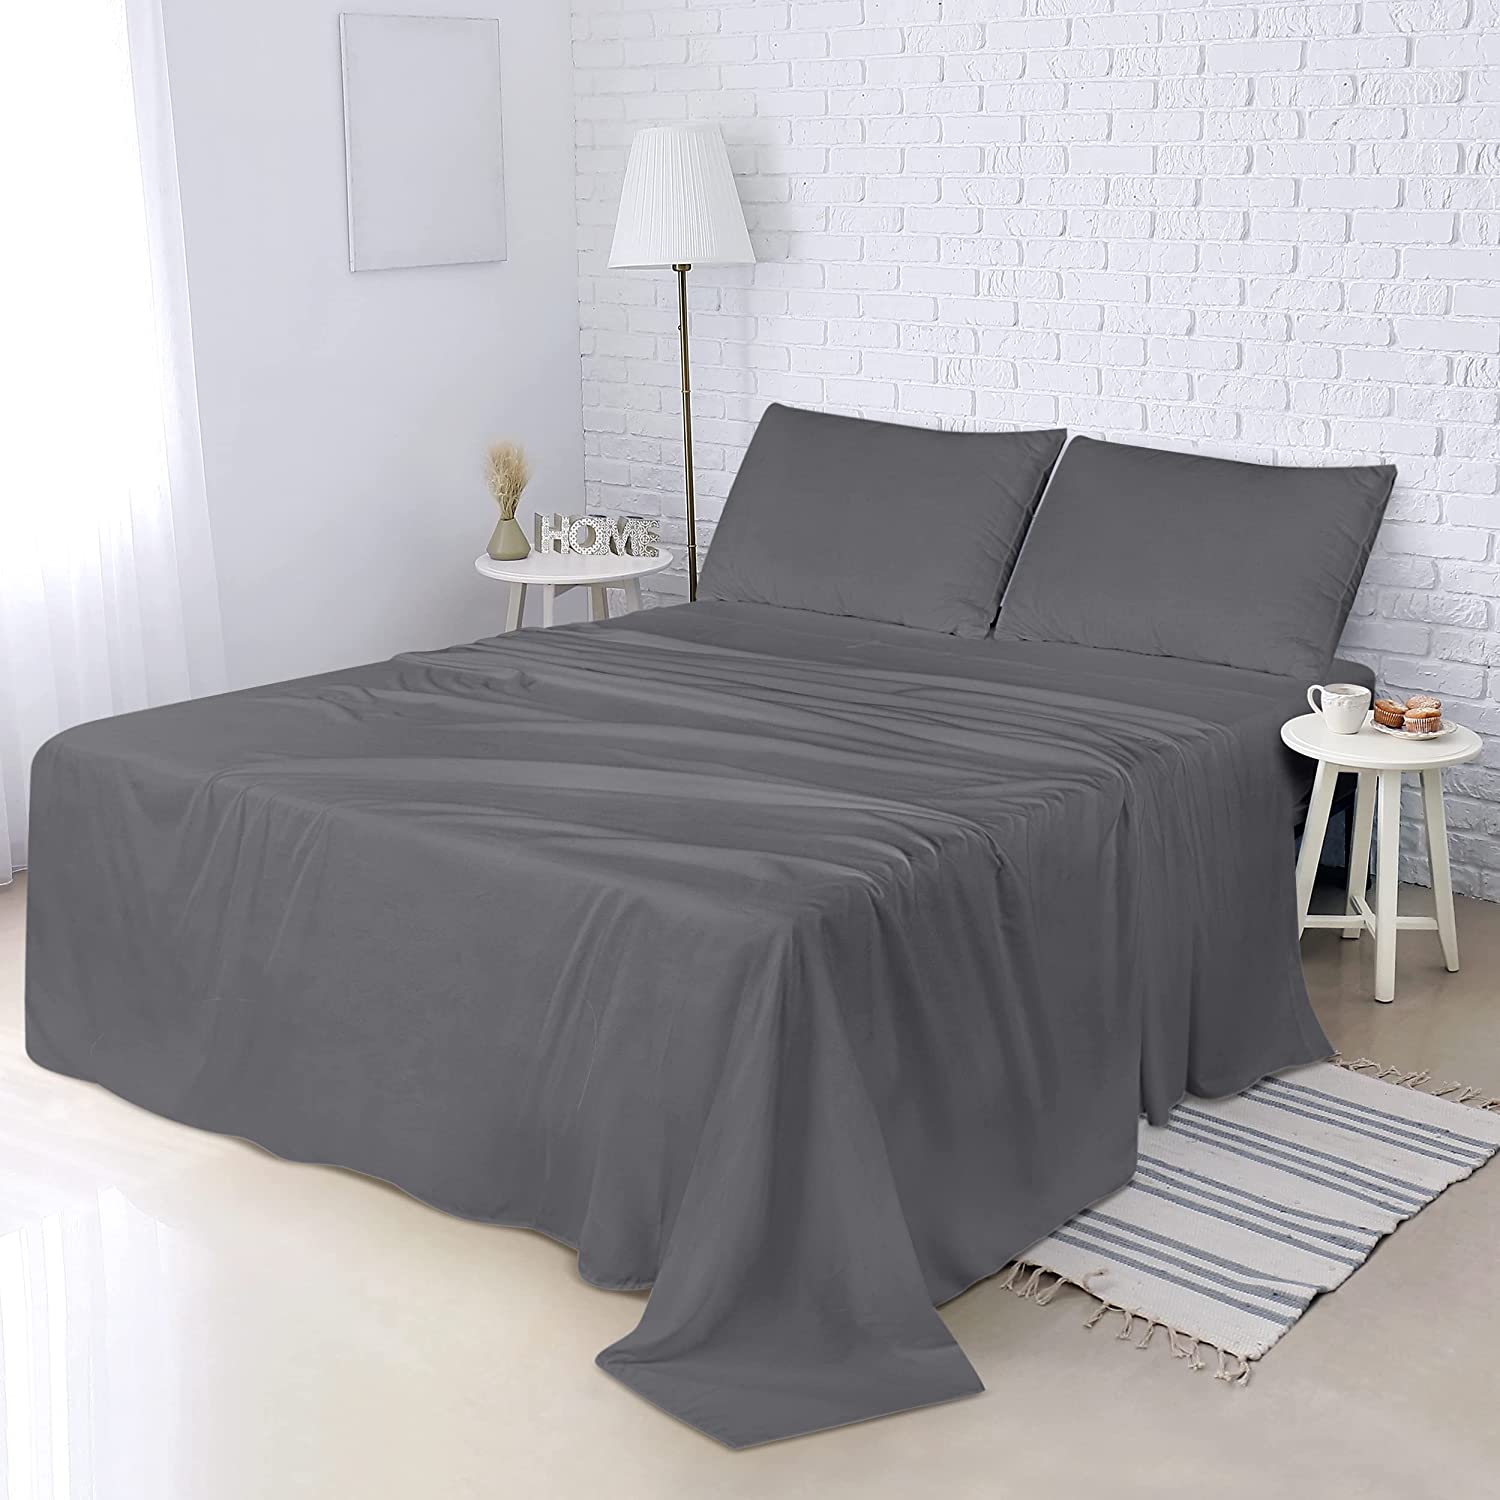 Utopia Deals Offers Bedding, Home, Kitchen Products at Wholesale Rates